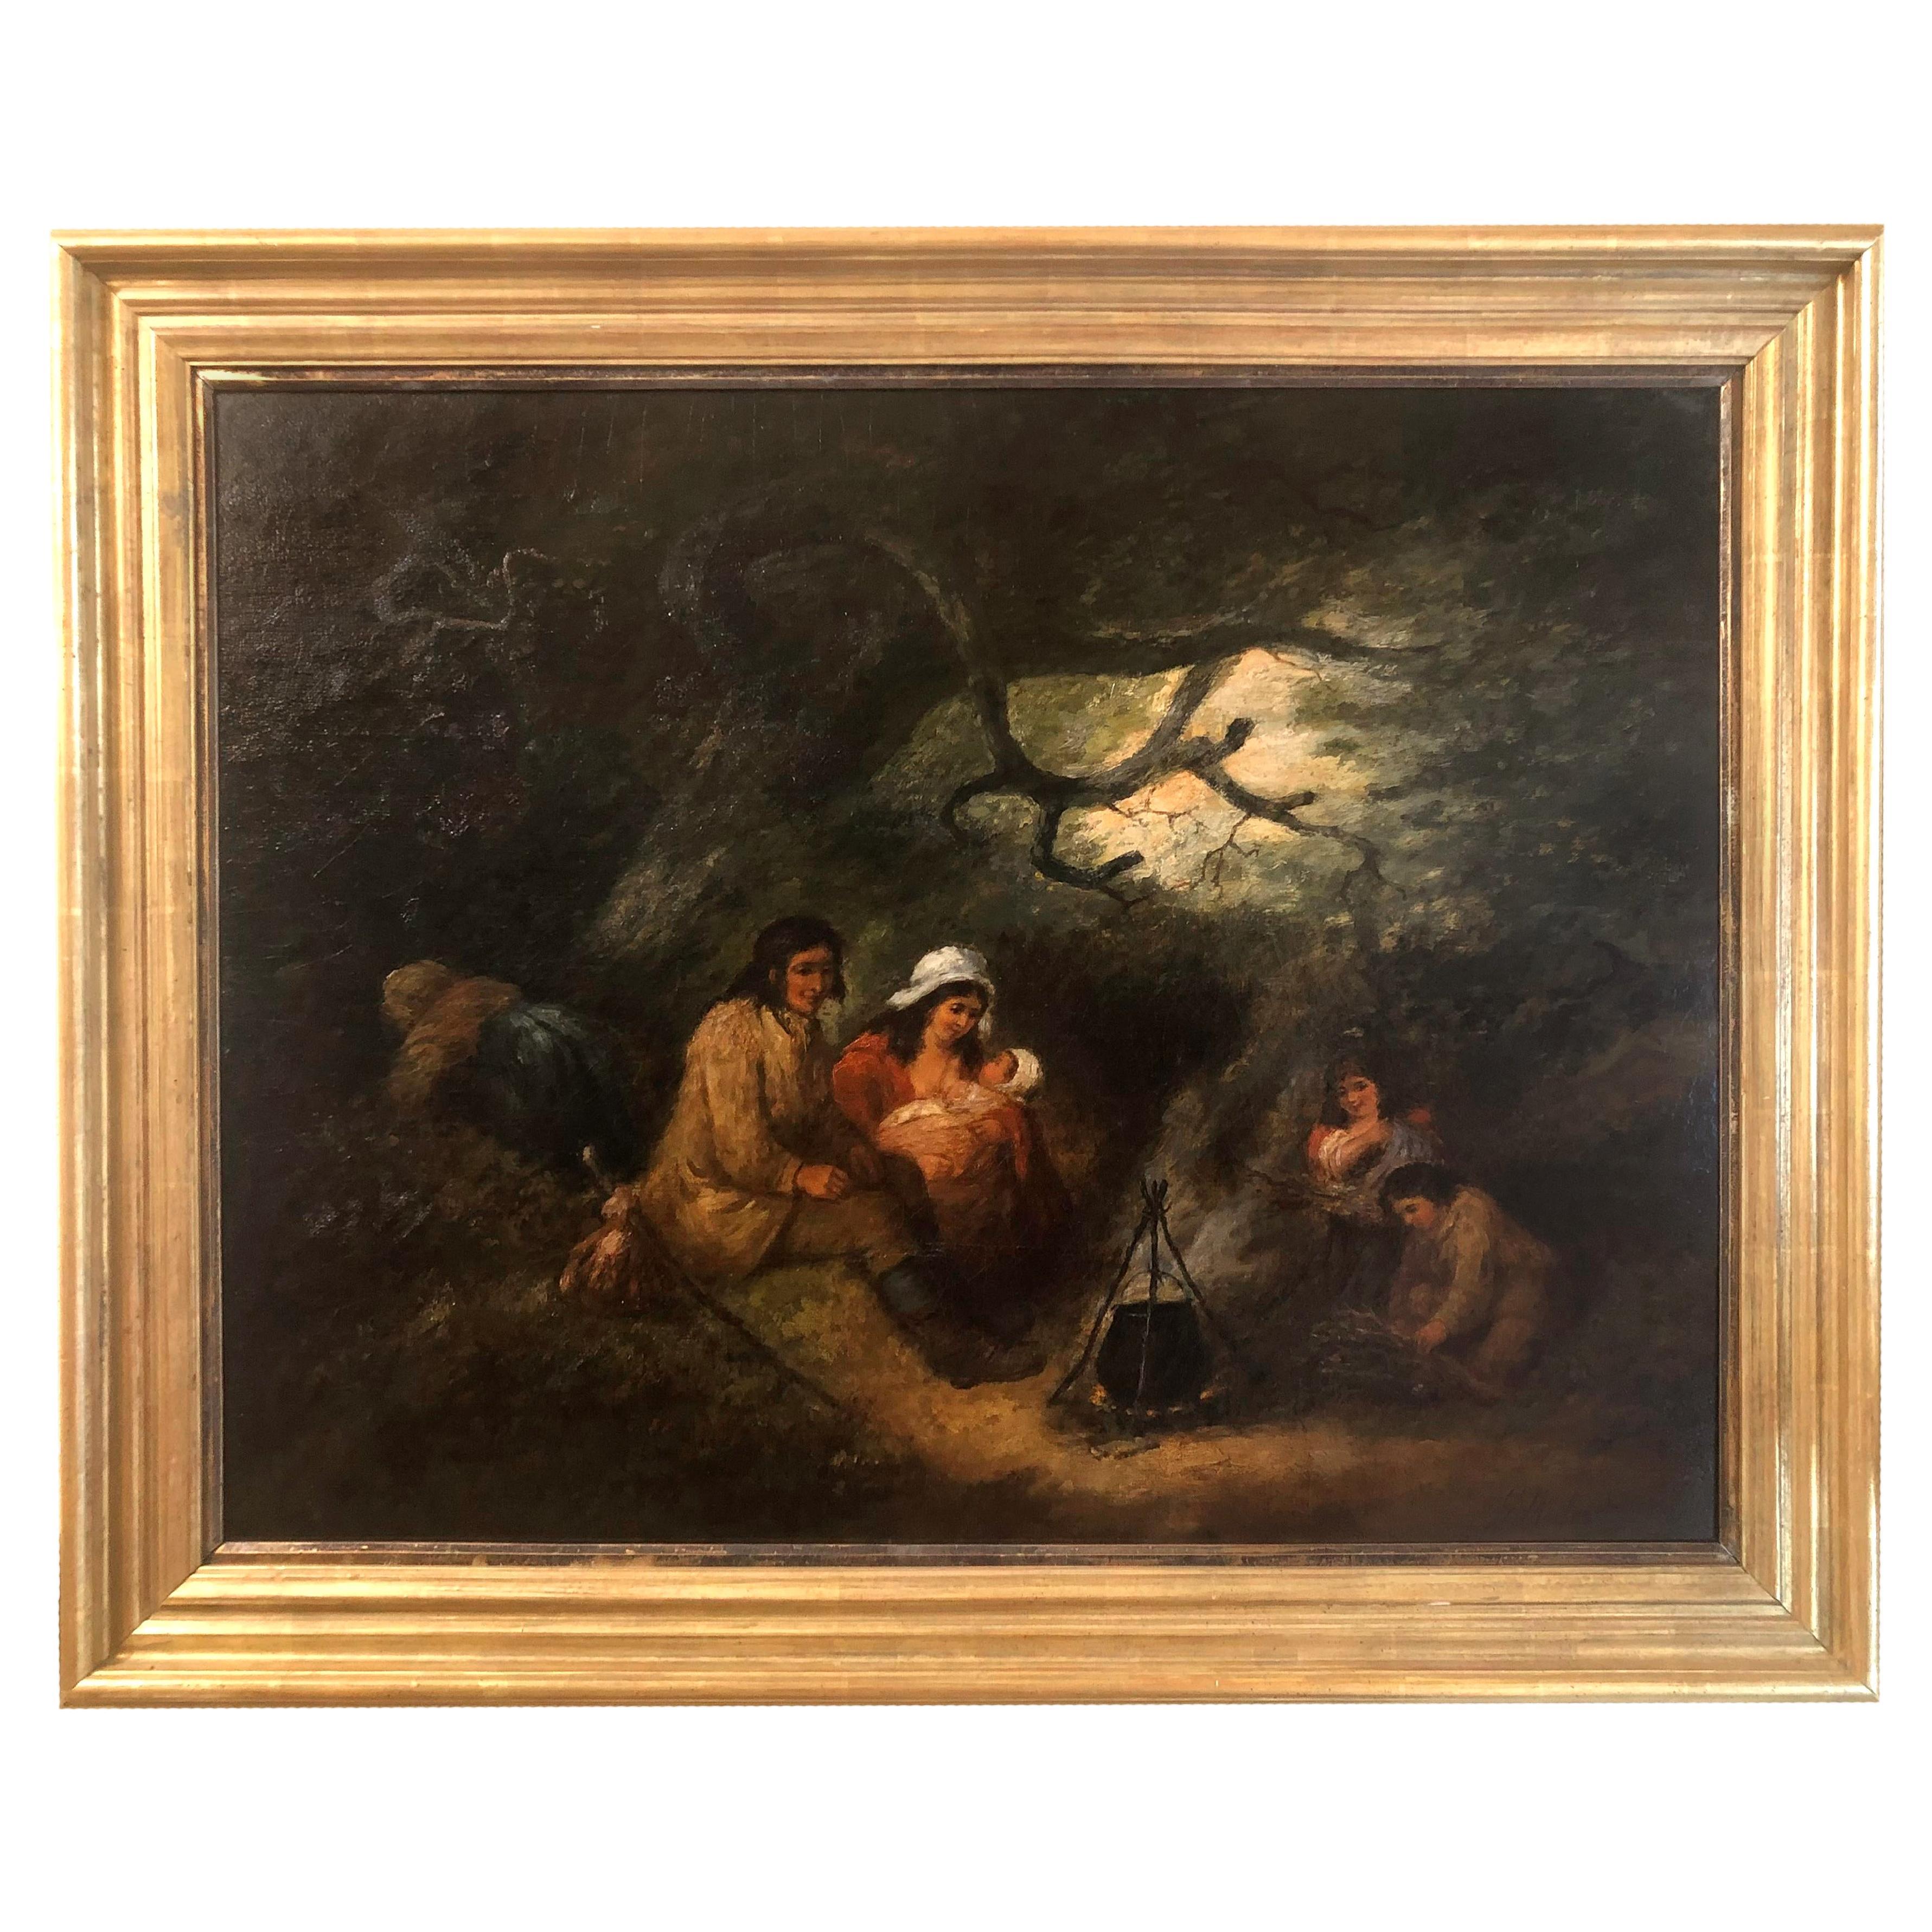 Late 18th Century Oil Painting "The Gypsy Family Encampment" by George Morland